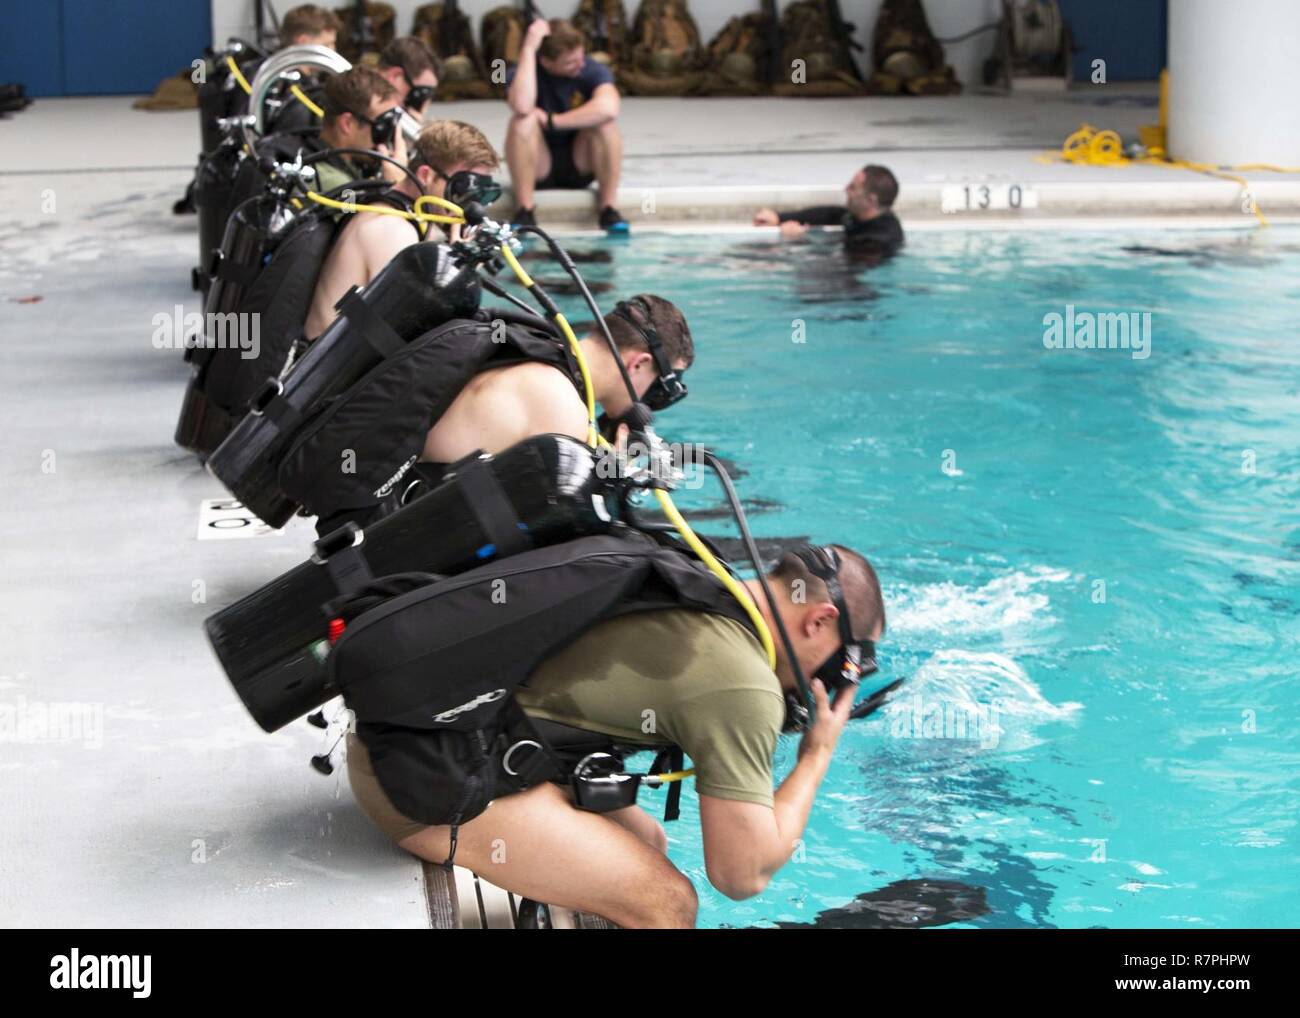 Marines dive into the pool during a battalion training event at Camp Lejeune, N.C., March 23, 2017. The self-contained underwater breathing apparatus provides Marines with deep-water diving capabilities essential for conducting real-world scenarios. The Marines are with 2nd Reconnaissance Battalion, 2nd Marine Division. Stock Photo